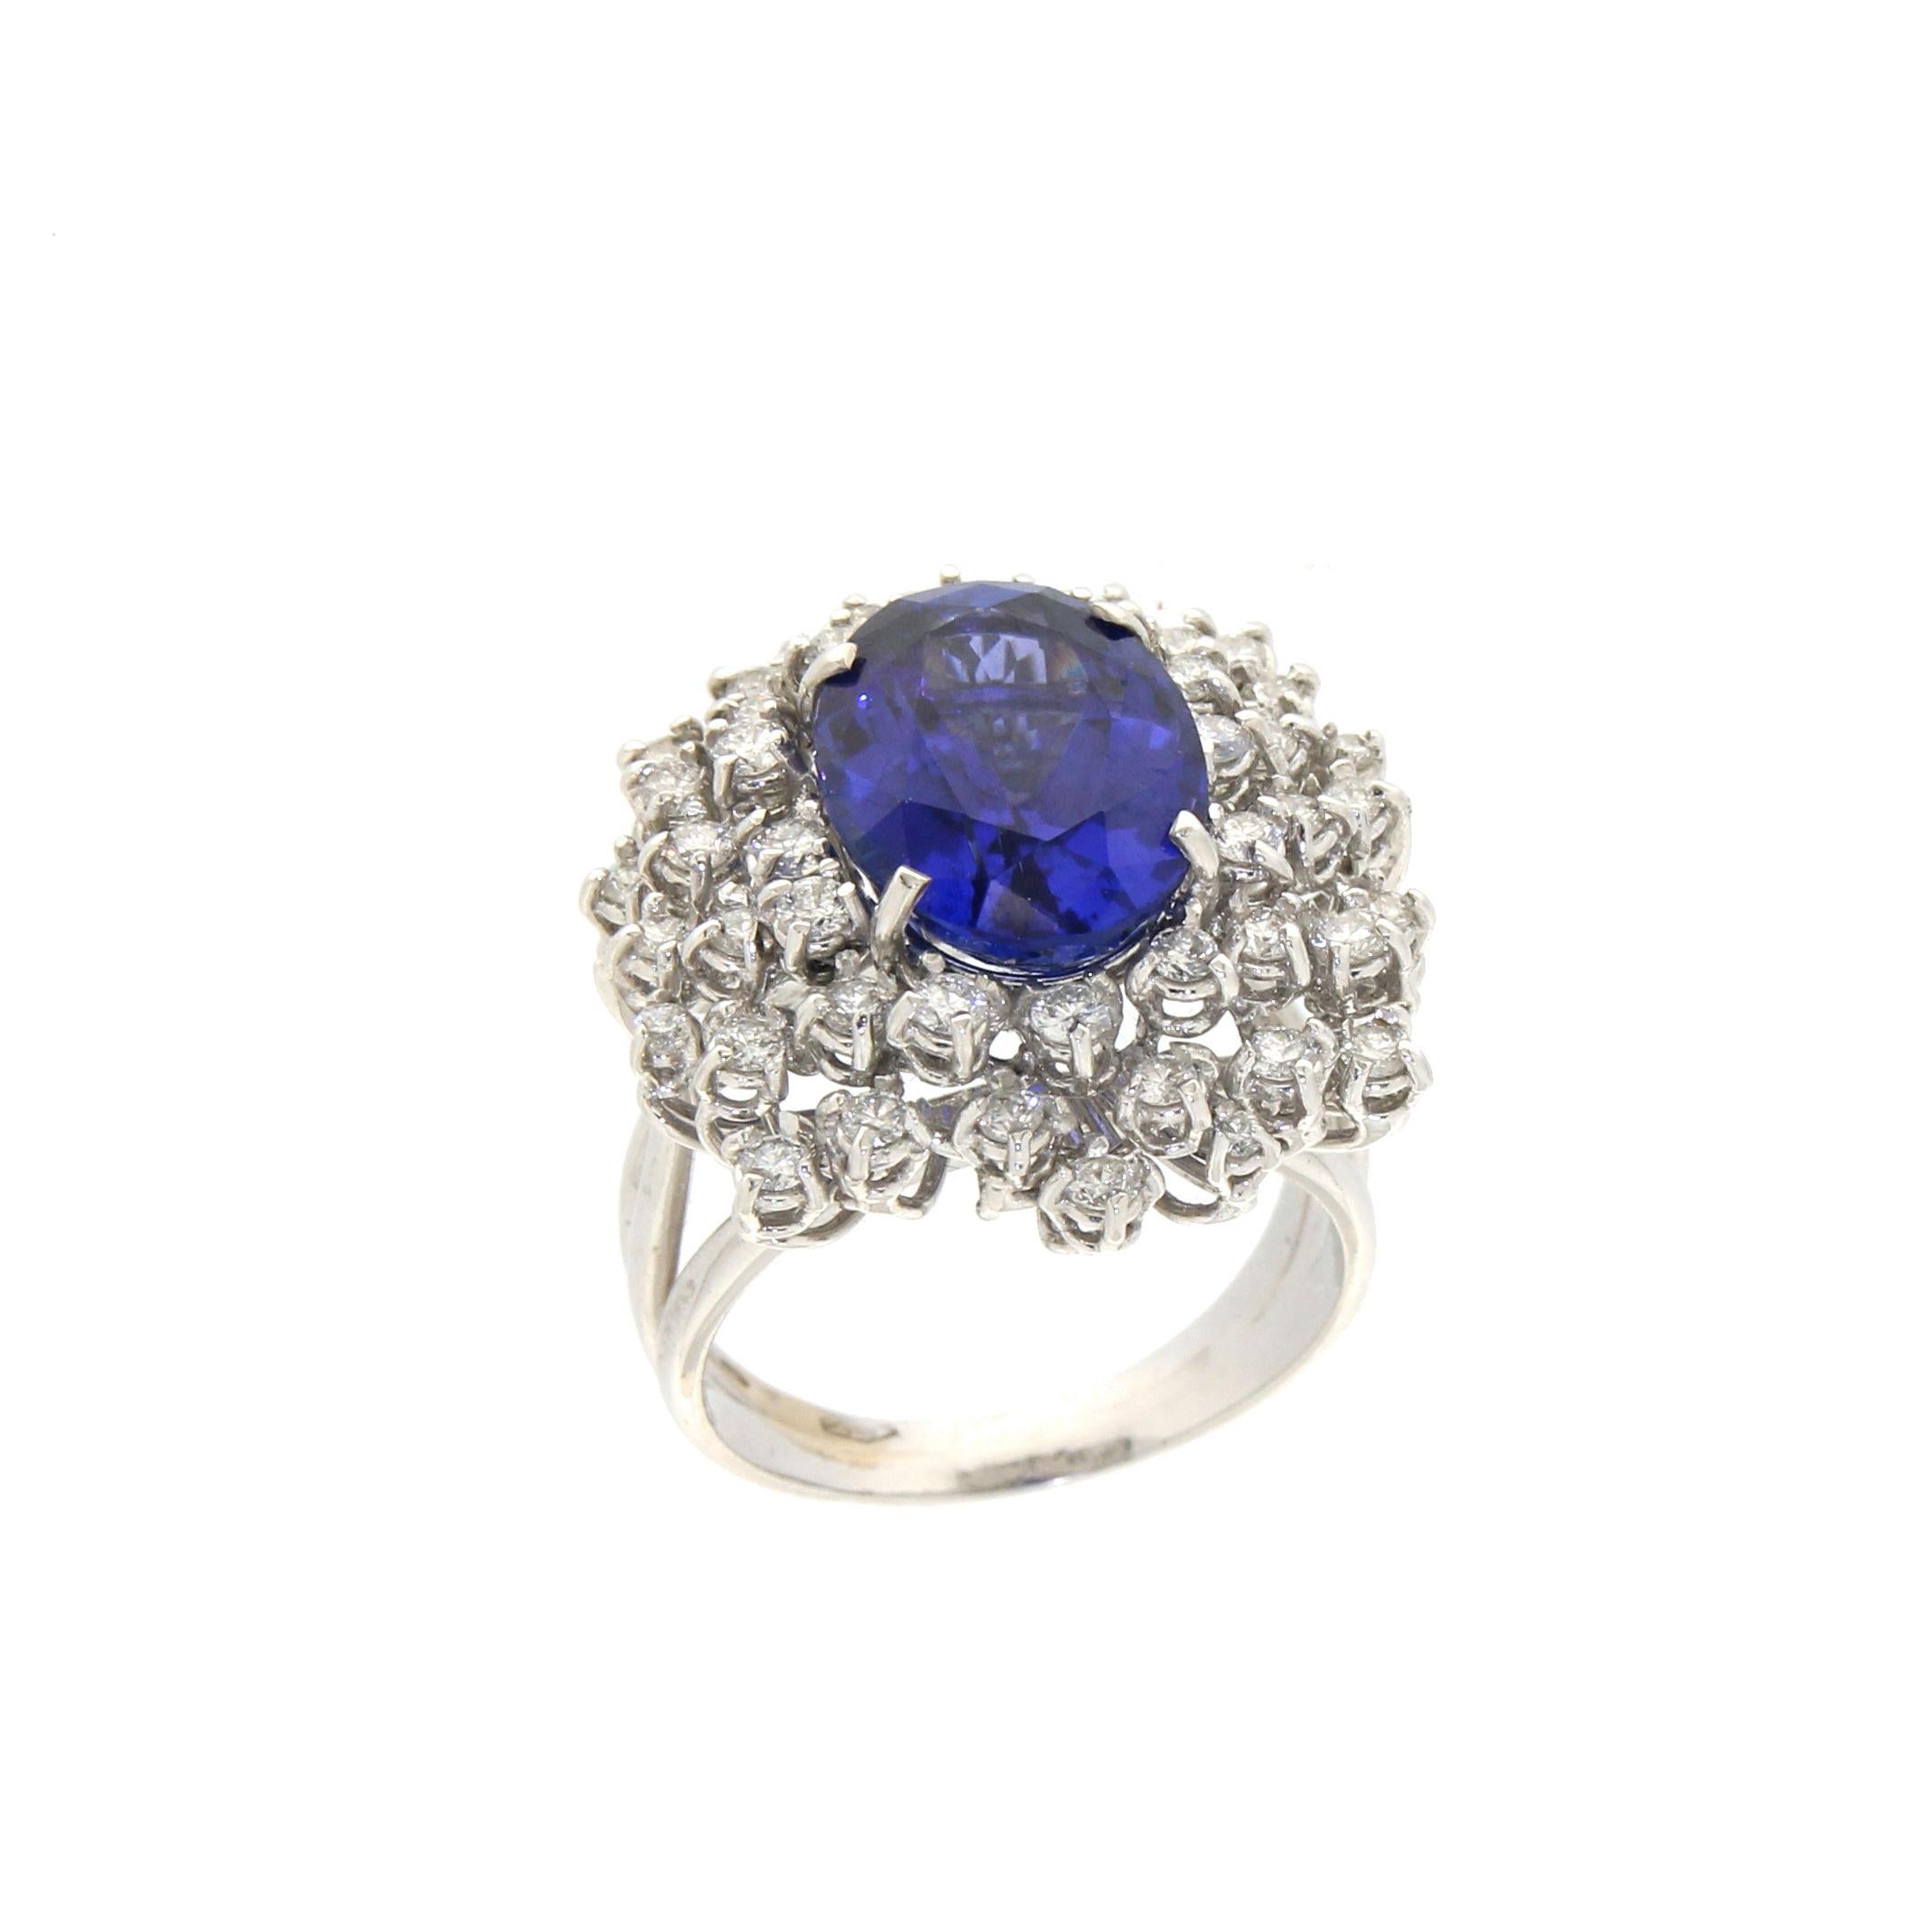 18 karat white gold cocktail ring. Handmade by our artisans assembled with tanzanite and diamonds.

Tanzanite weight 7.44 karat
Diamonds weight 1.25 karat
Ring total weight 13.70 grams
Ring size 8.15 US 17.20 Ita

(all rings are can be resized)